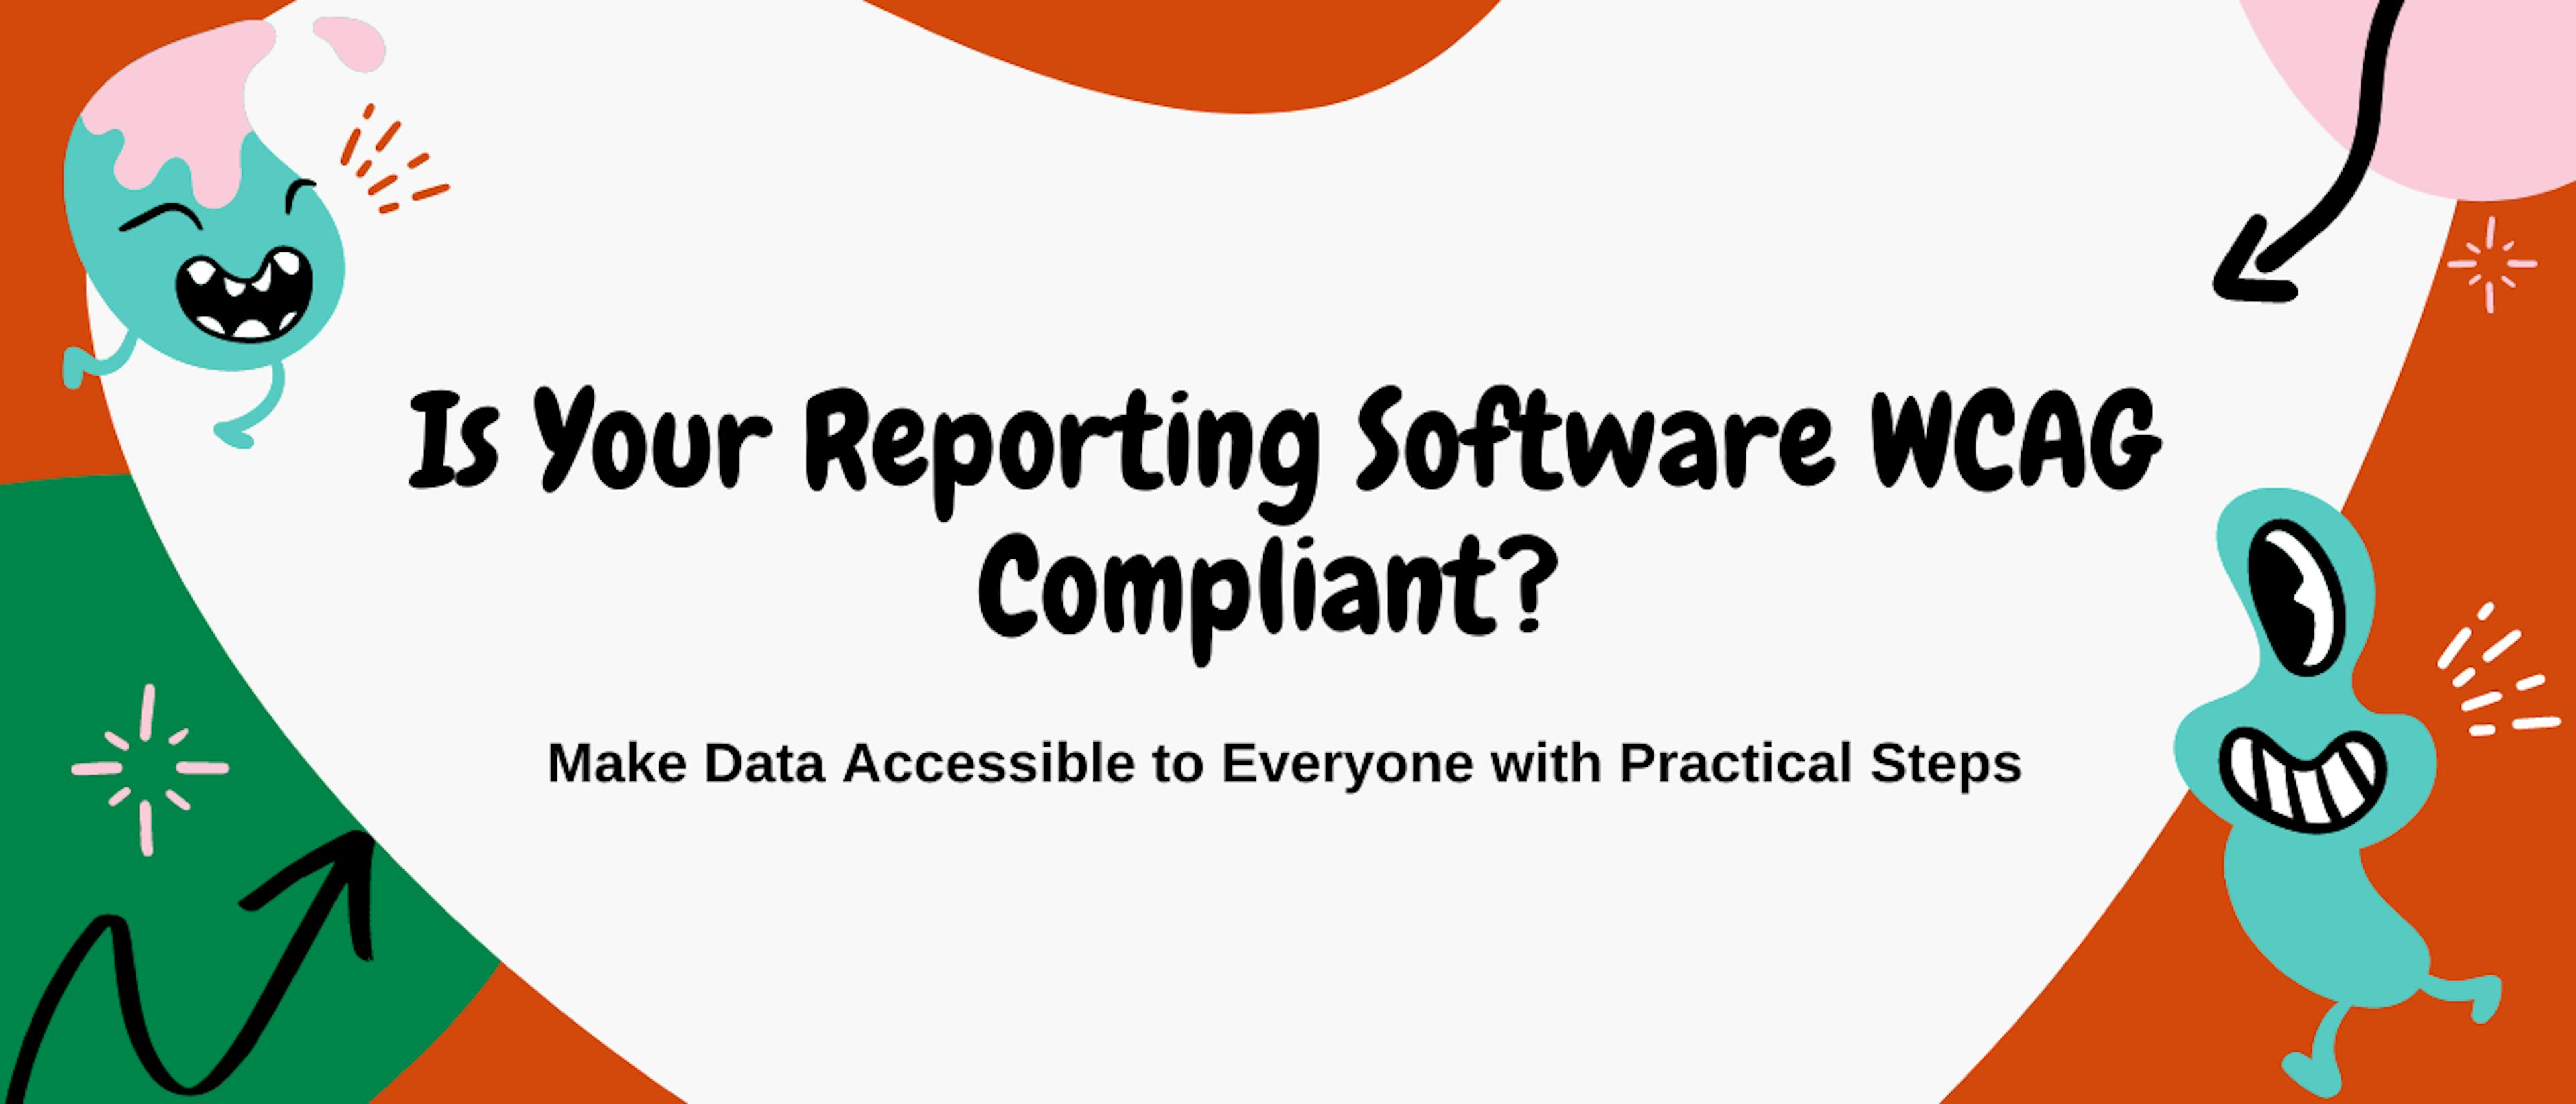 featured image - Is Your Reporting Software WCAG Compliant? Make Data Accessible to Everyone with Practical Steps